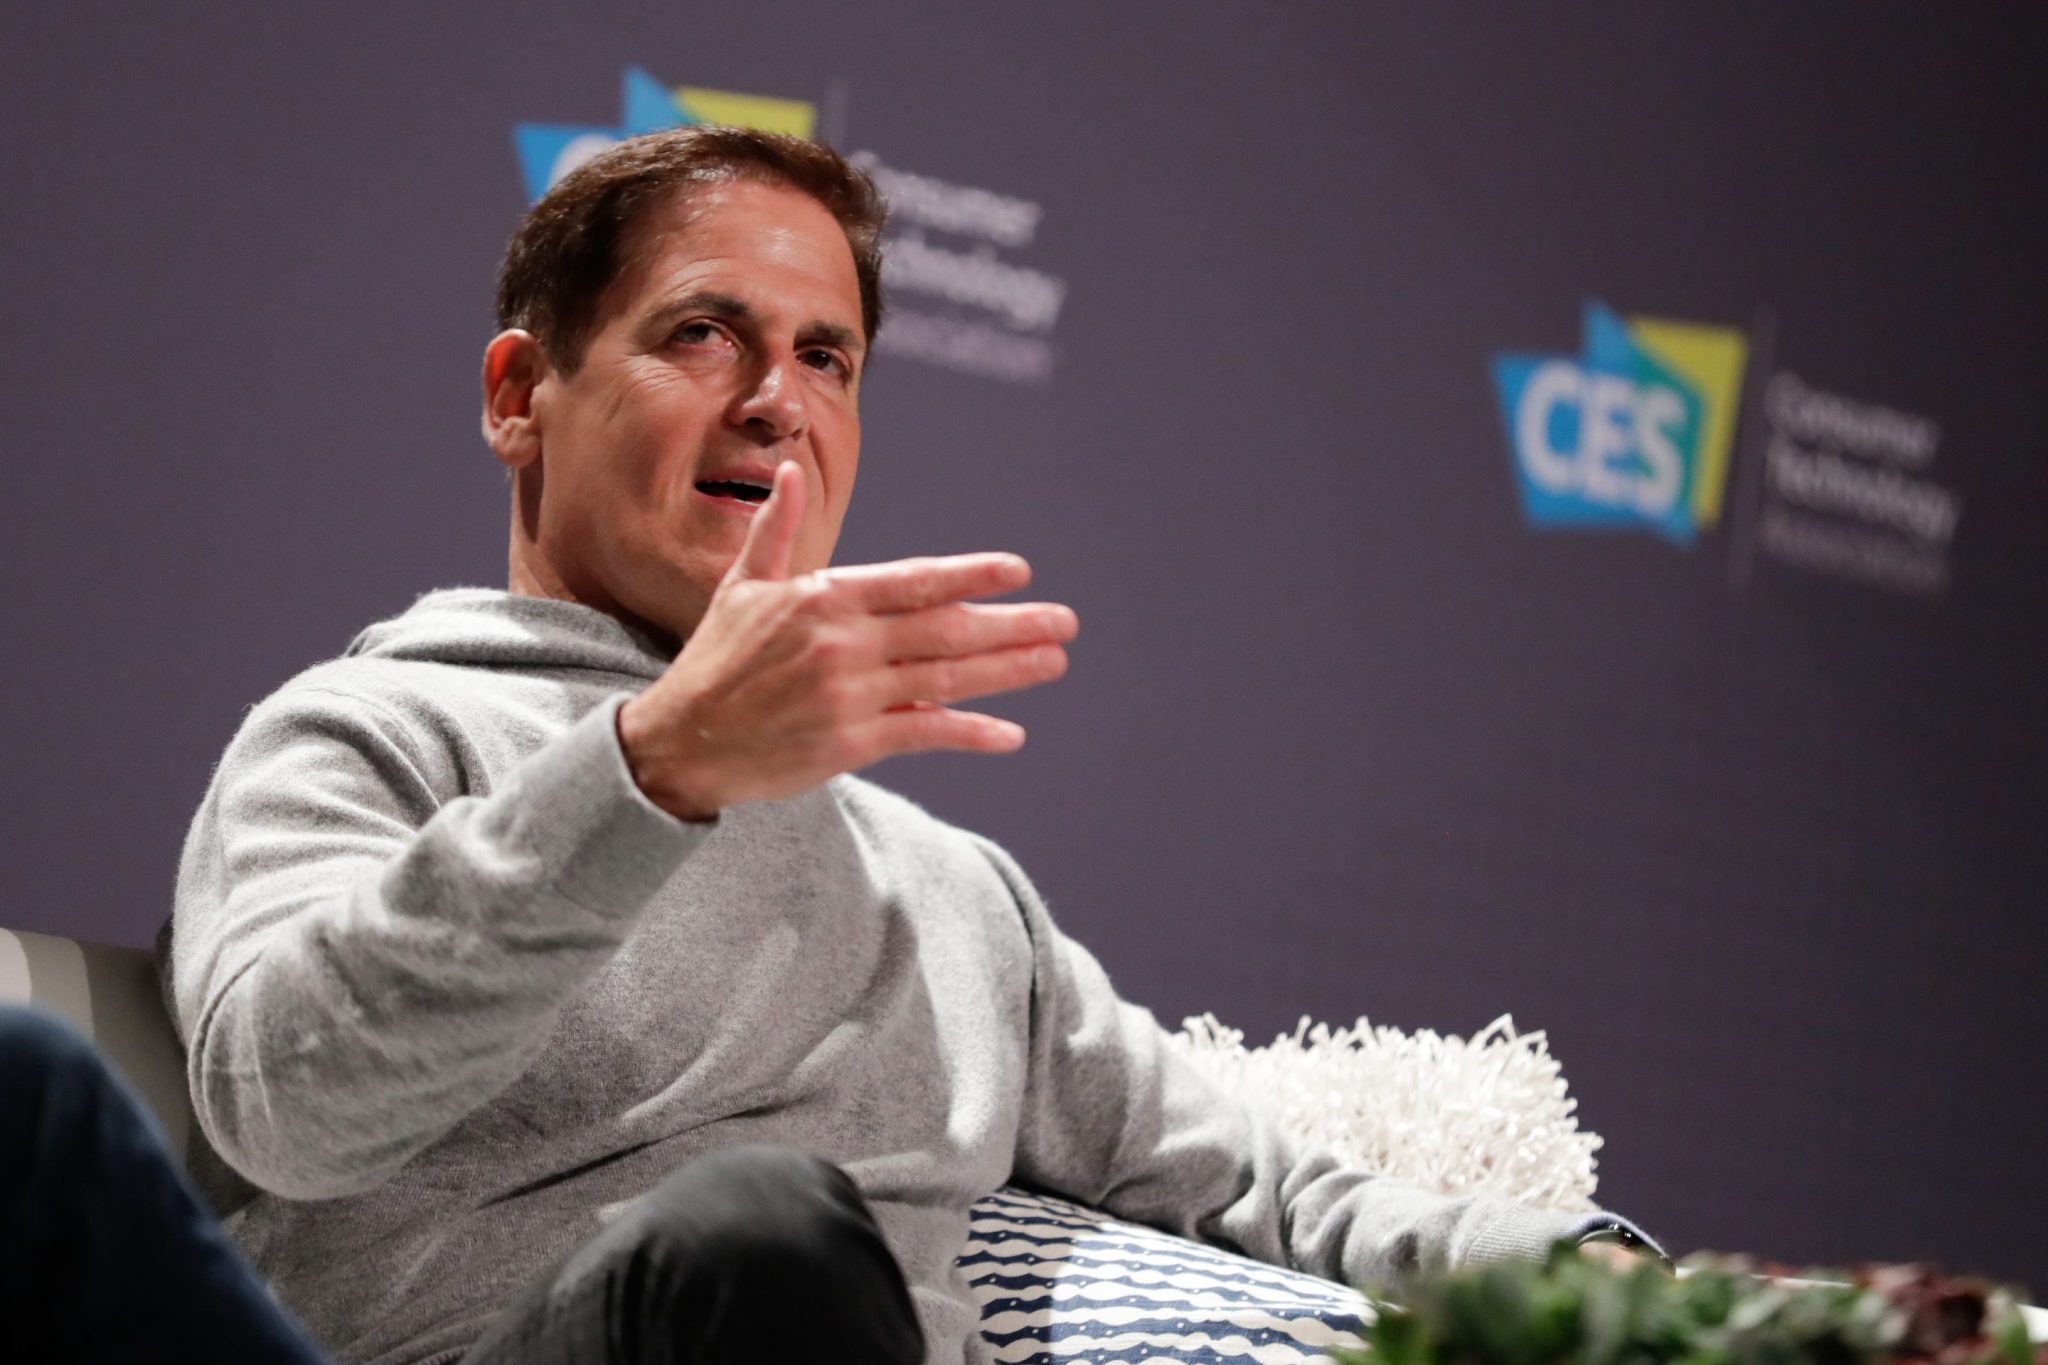 Wanting to learn AI? Mark Cuban has a free AI bootcamp that may be coming to a city near you